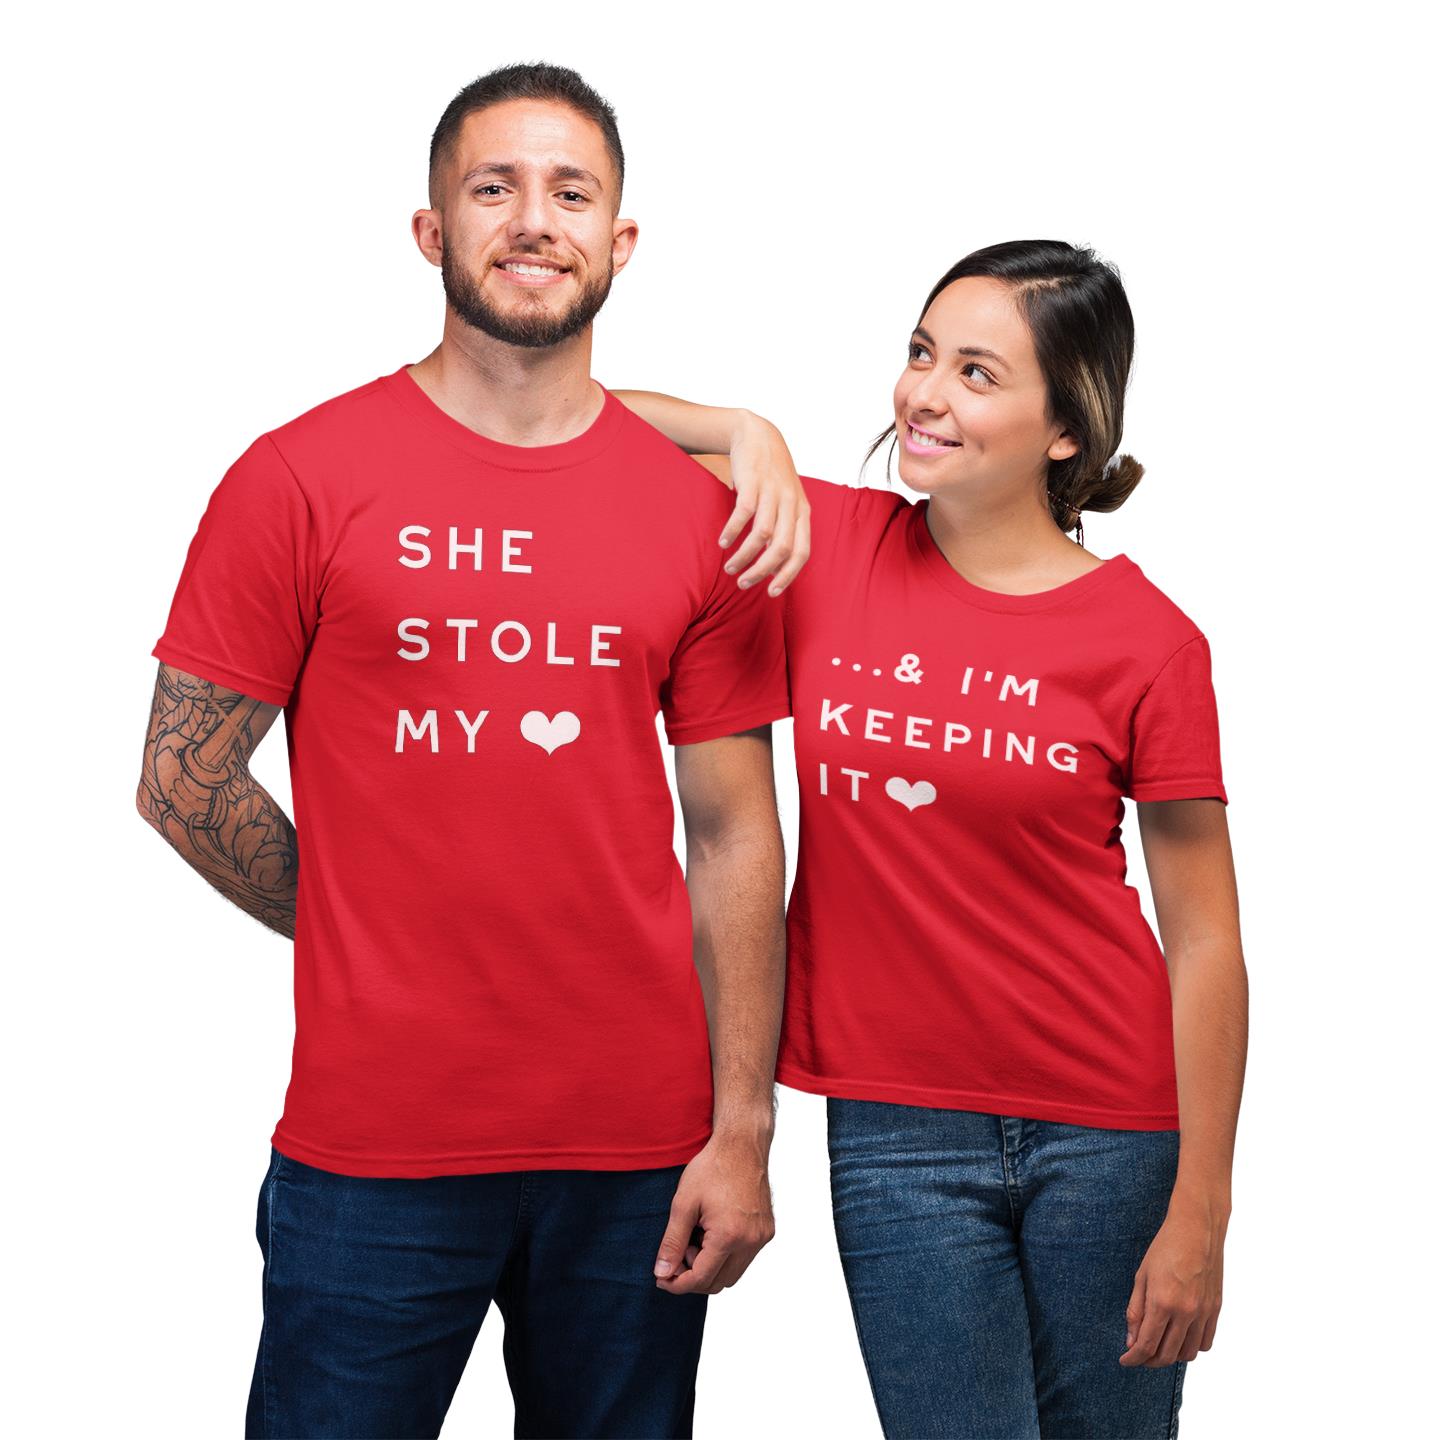 She Stole My Heart I?m Keeping It Matching For Couple Valentine Day Shirt For Lover T-shirt